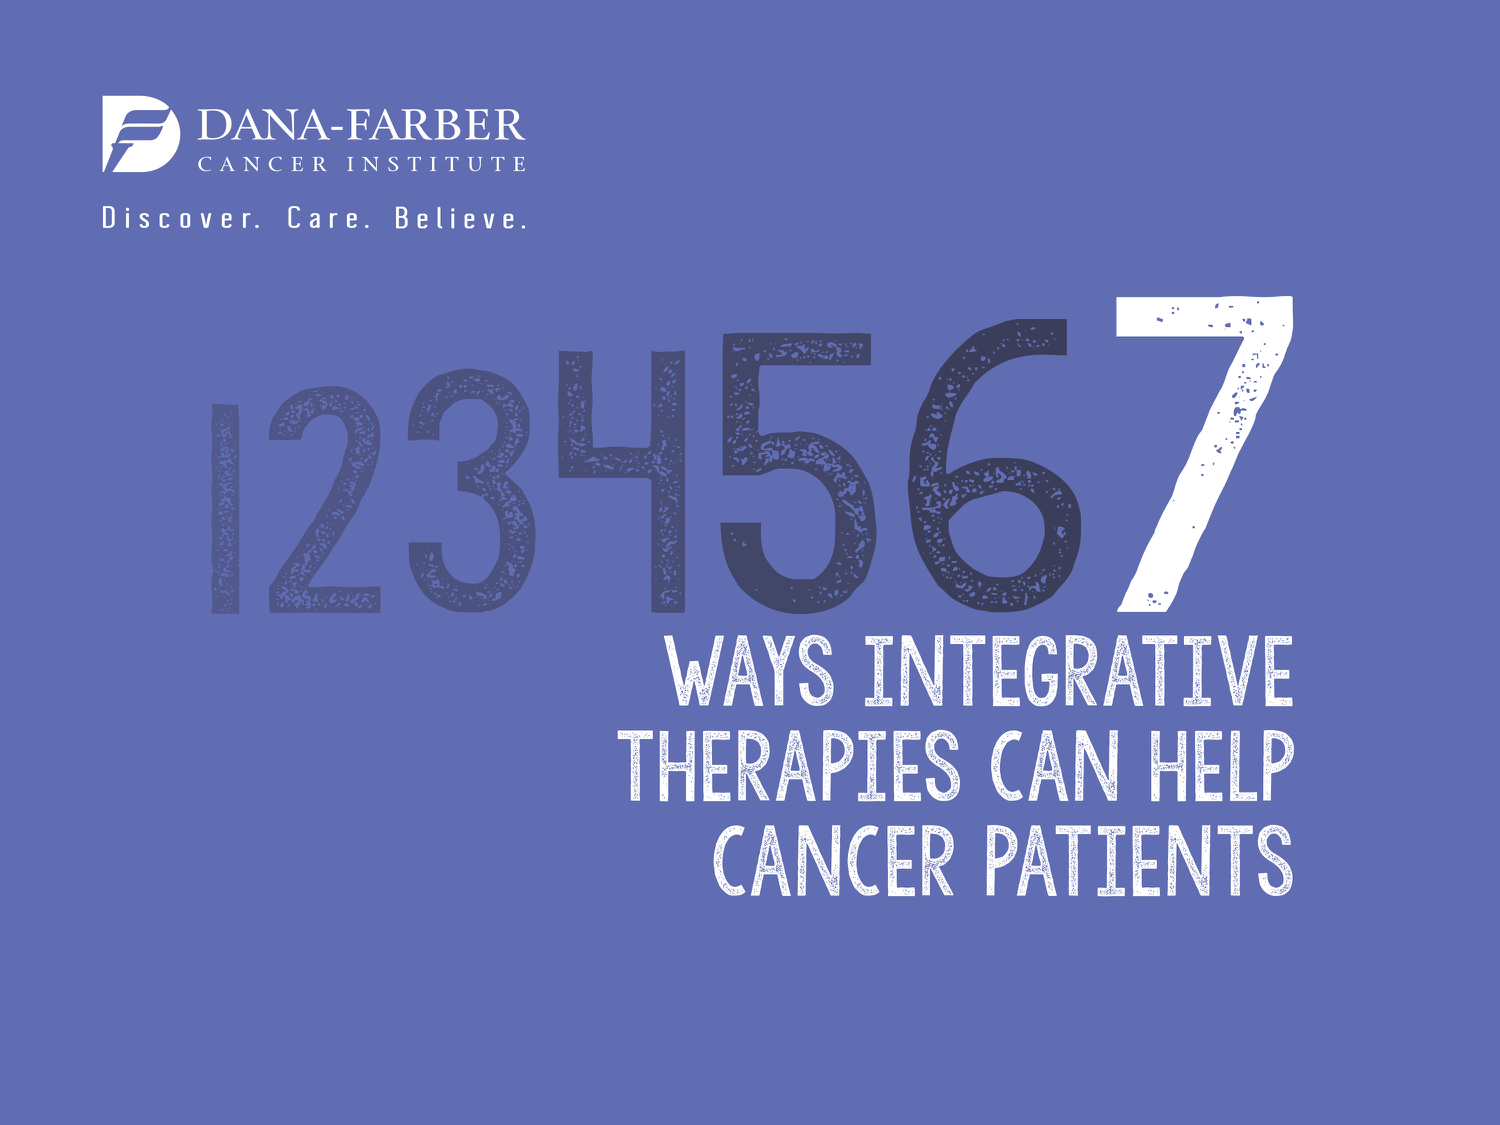 Seven ways integrative therapies can help cancer patients: acupuncture has been shown to reduce pain and nausea, massage therapy provides relaxation and comfort, reflexology can promote relaxation and comfort, Reiki is a hand-on energy-healing therapy, movement therapies may ease tired muscles and reduce stress, expressive arts therapies can bring about positive changes in mood, meditation can help with relaxation and anxiety.